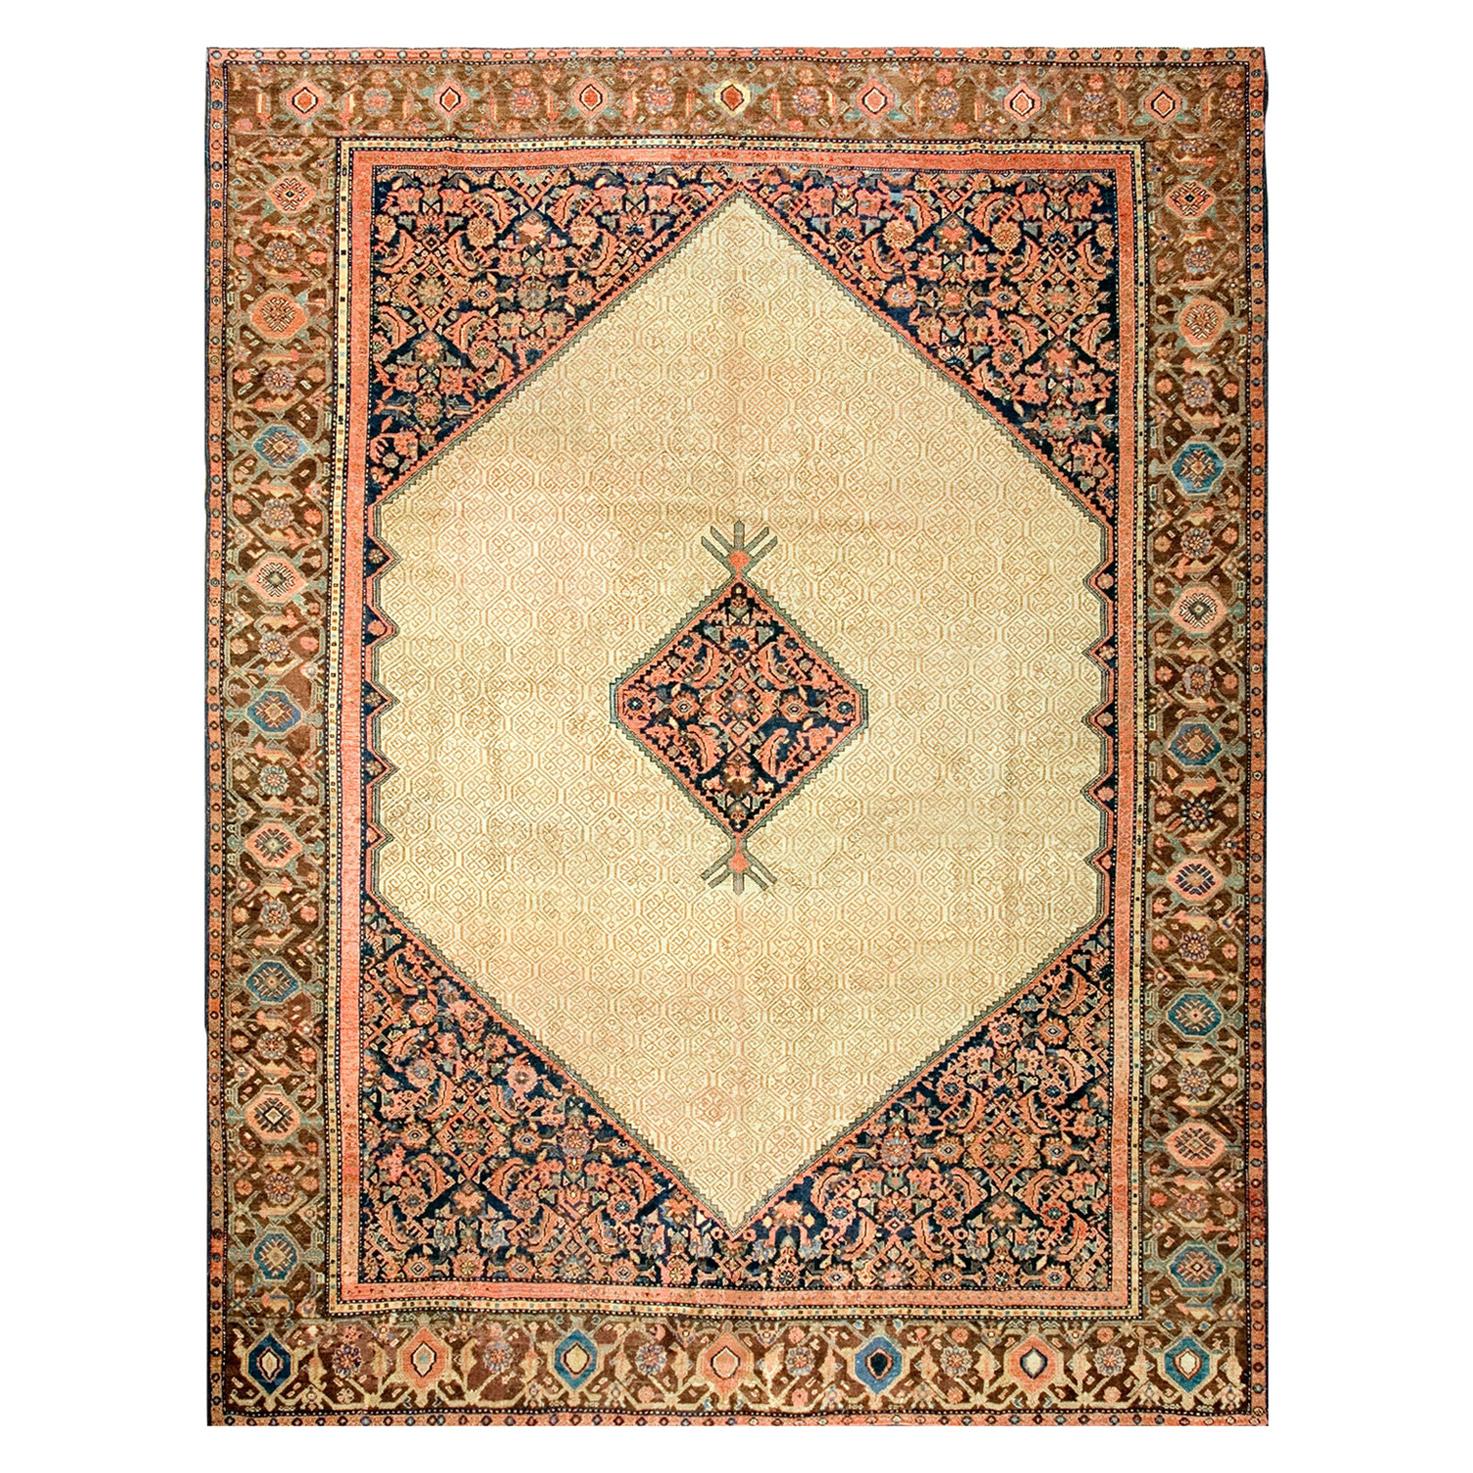 Early 20th Century Persian Malayer Carpet ( 9'3" x 12'6" - 282 x 382 ) For Sale